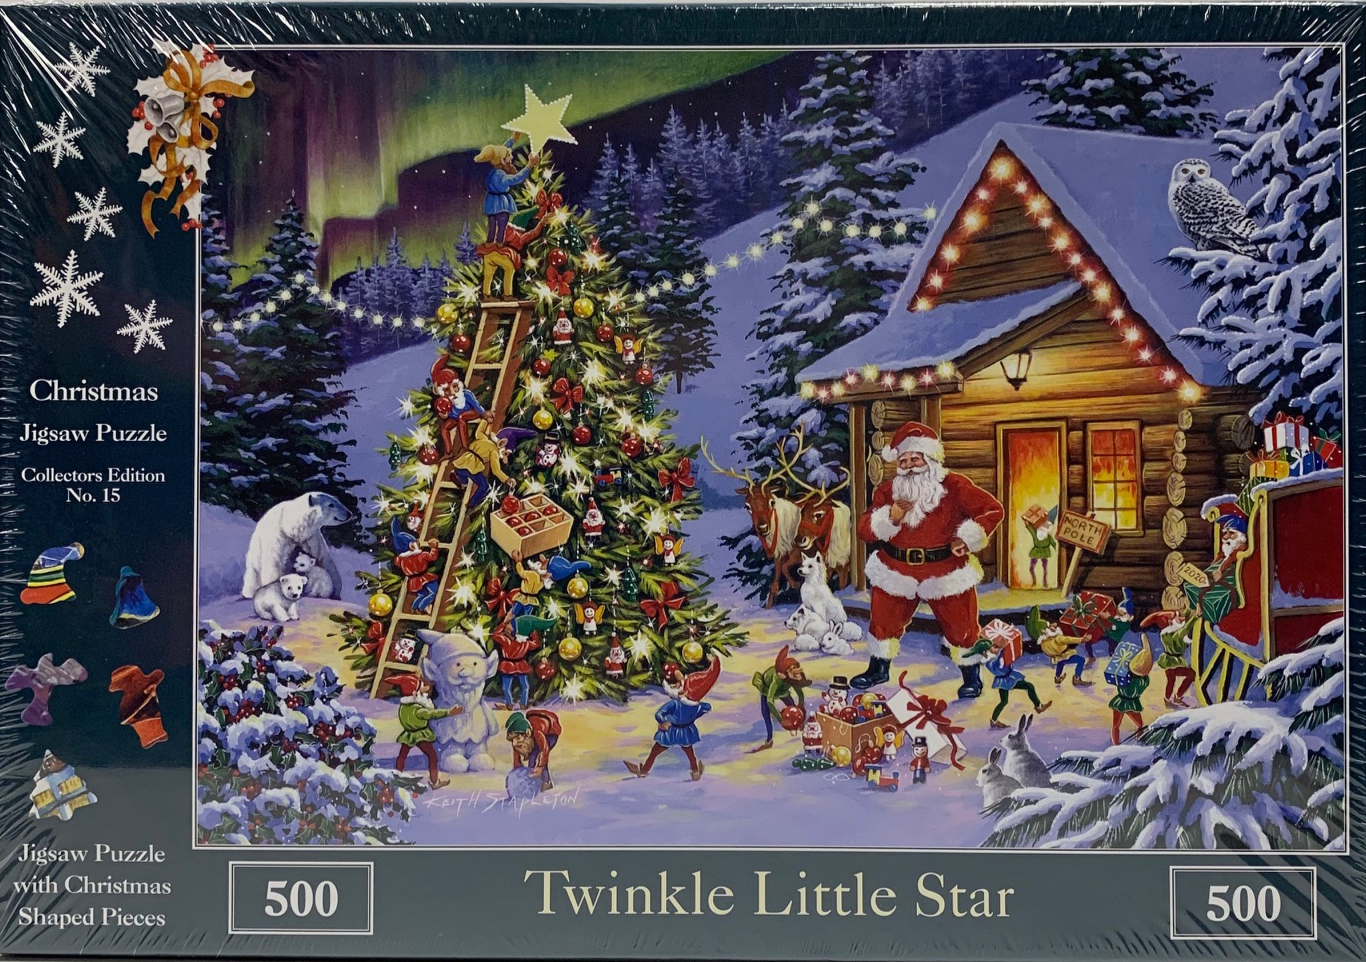 The House of Puzzles Twinkle Little Star 500